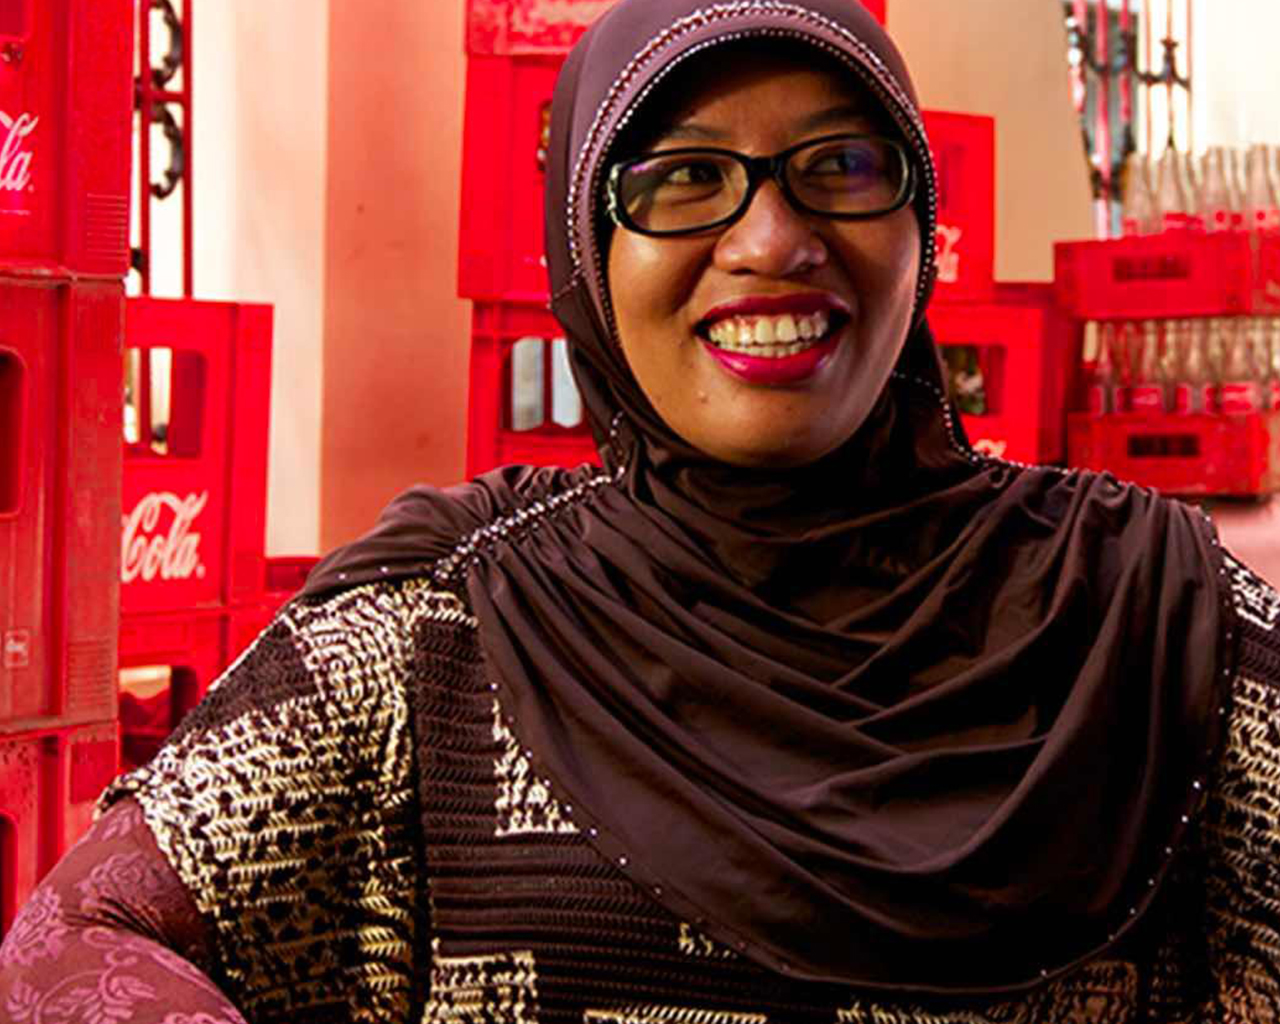 A woman smiling in front of multiple Coca-Cola red boxes